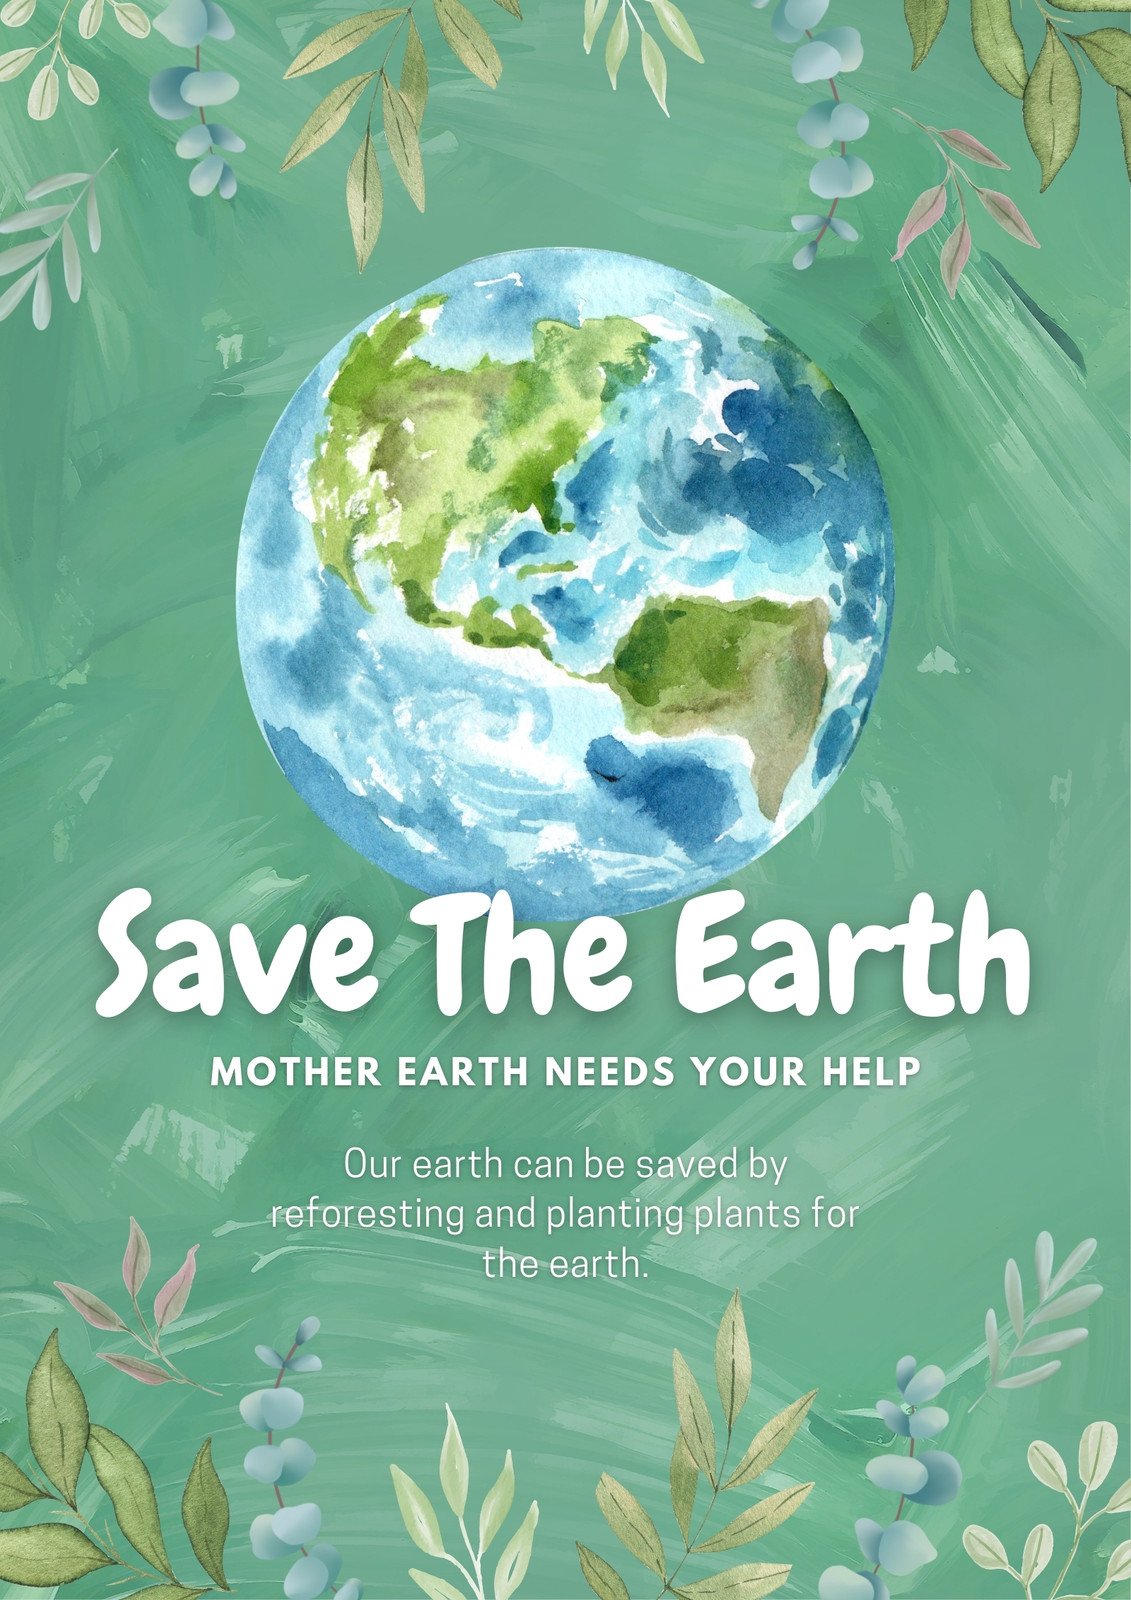 prepare a poster presentation on mother earth